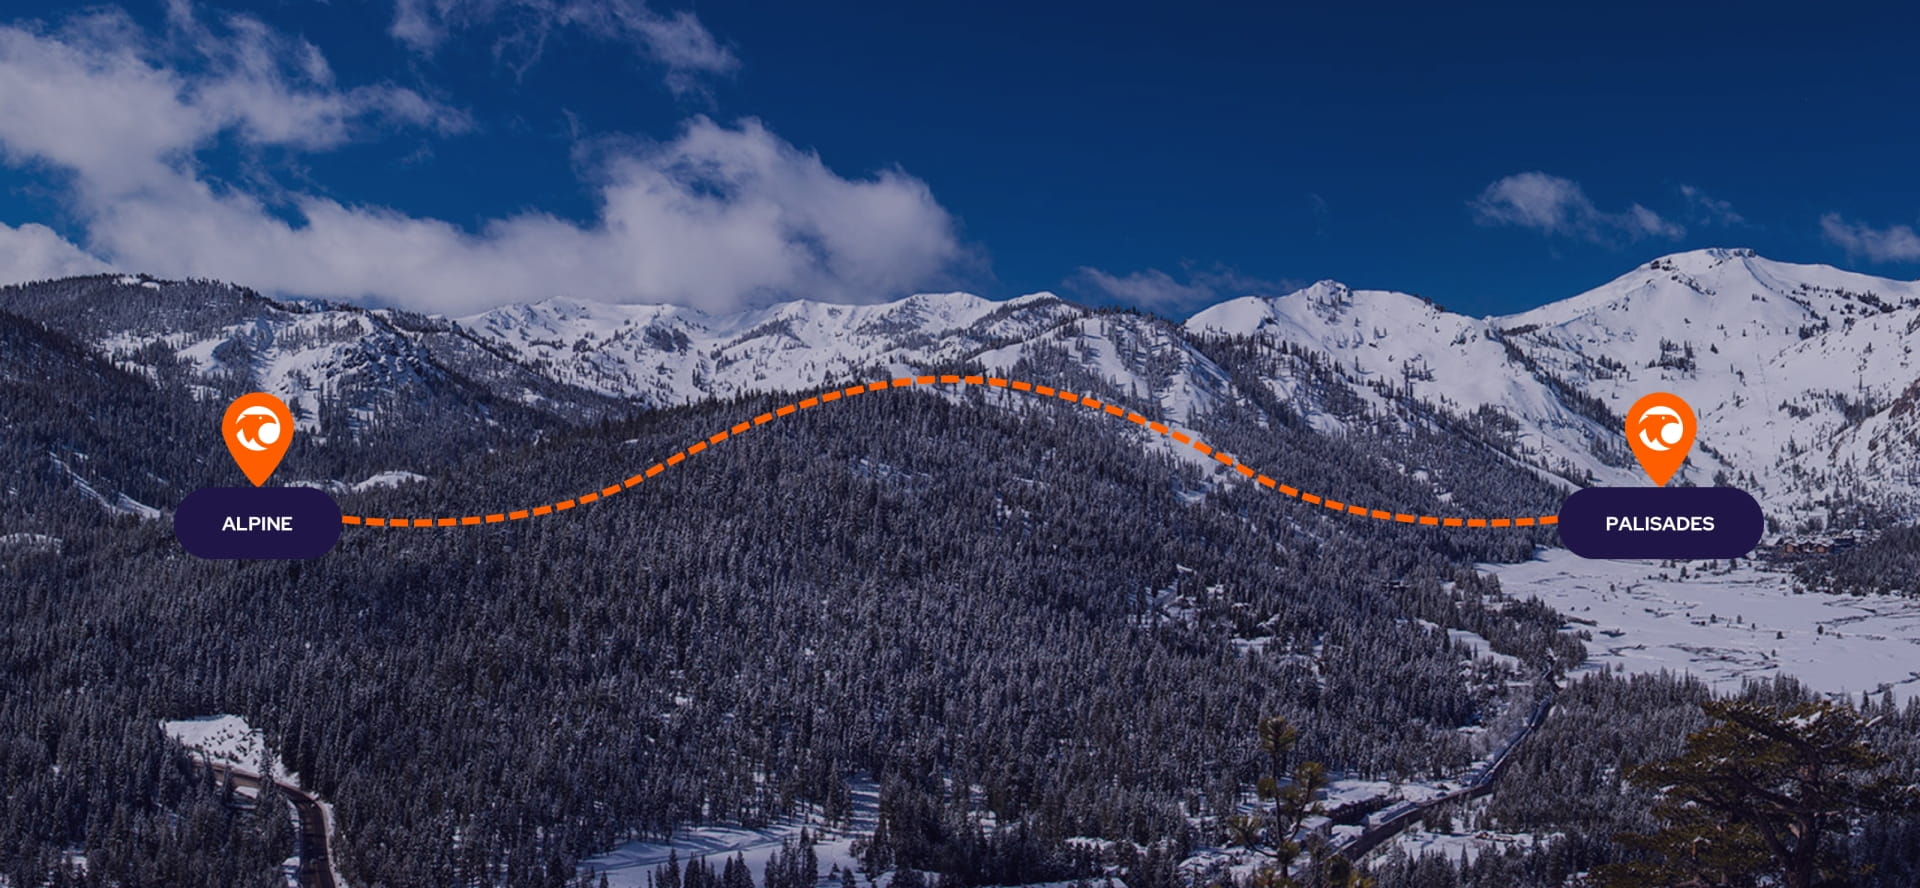 The gondola will connect our two legendary mountains.